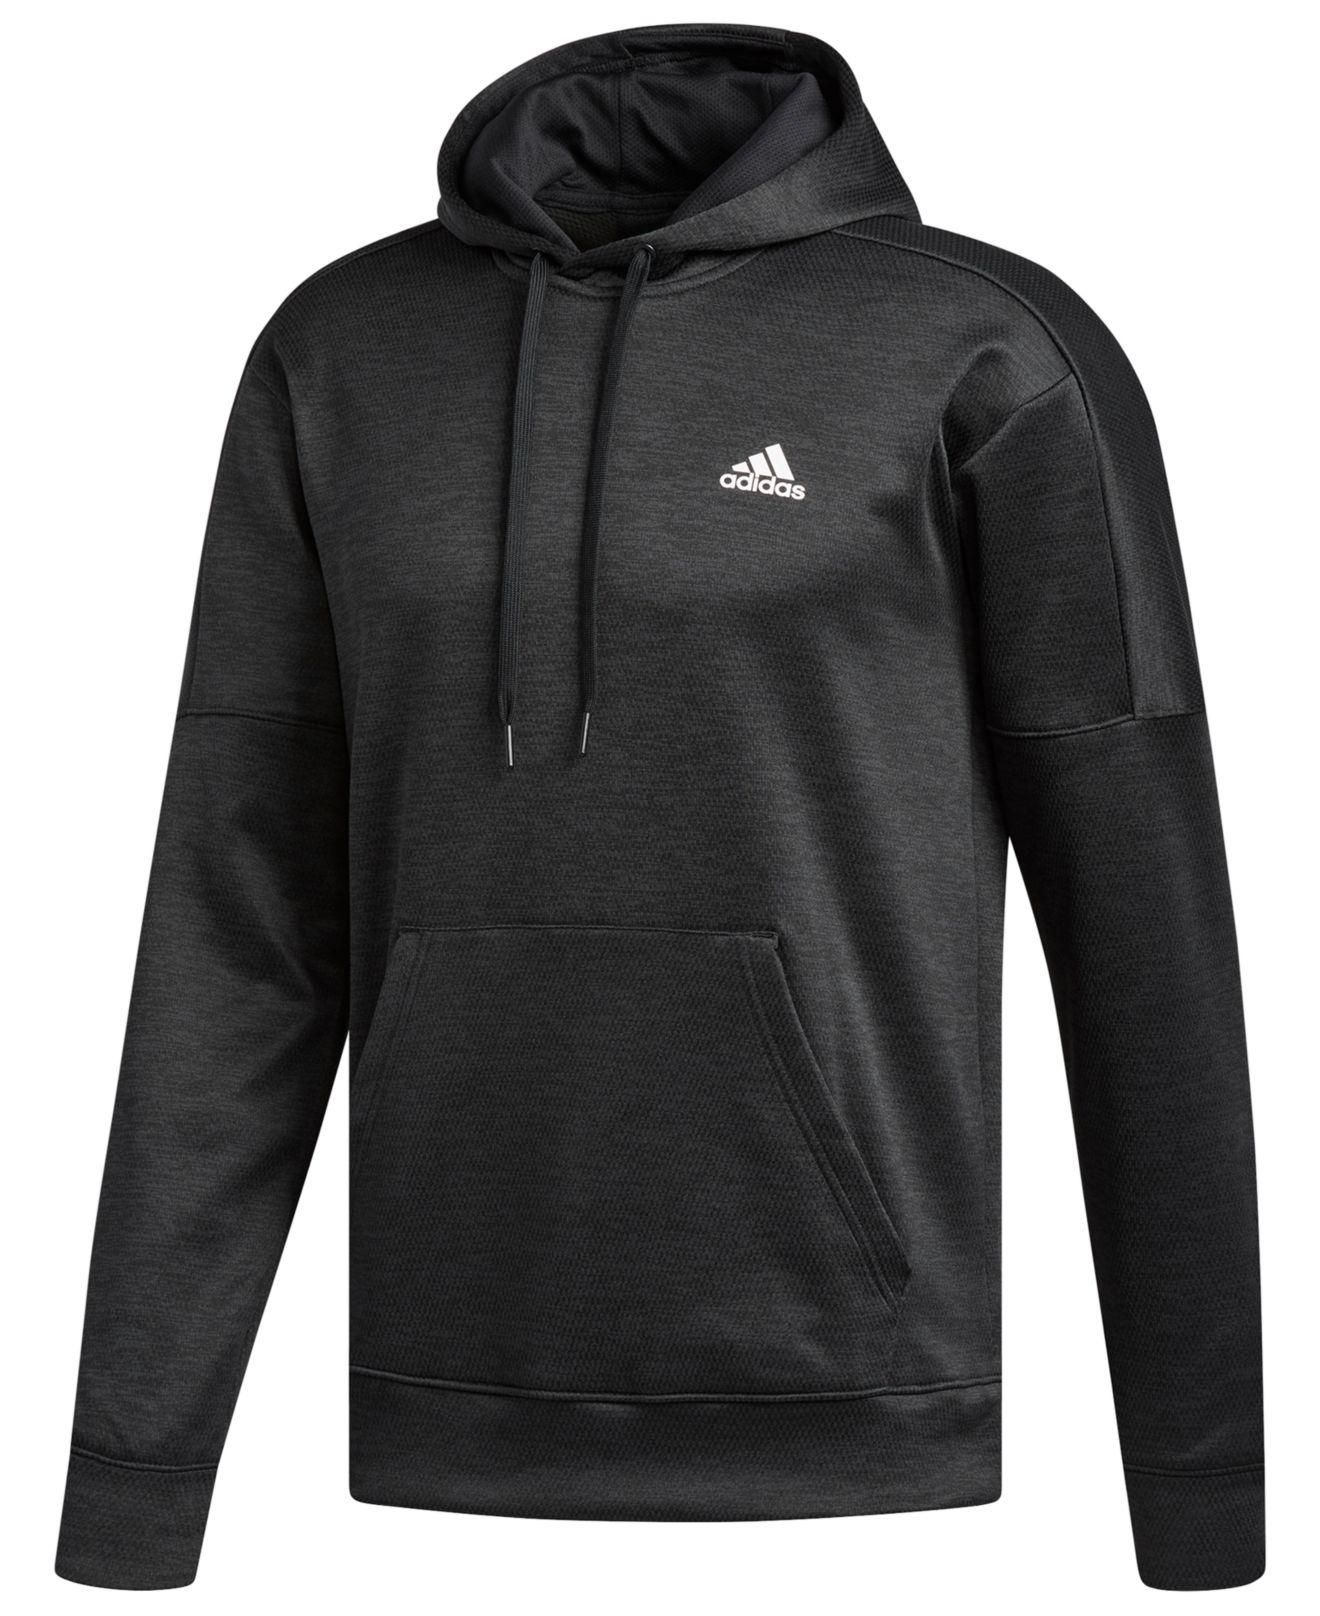 adidas Synthetic Team Issue Fleece Hoodie in Black for Men - Lyst